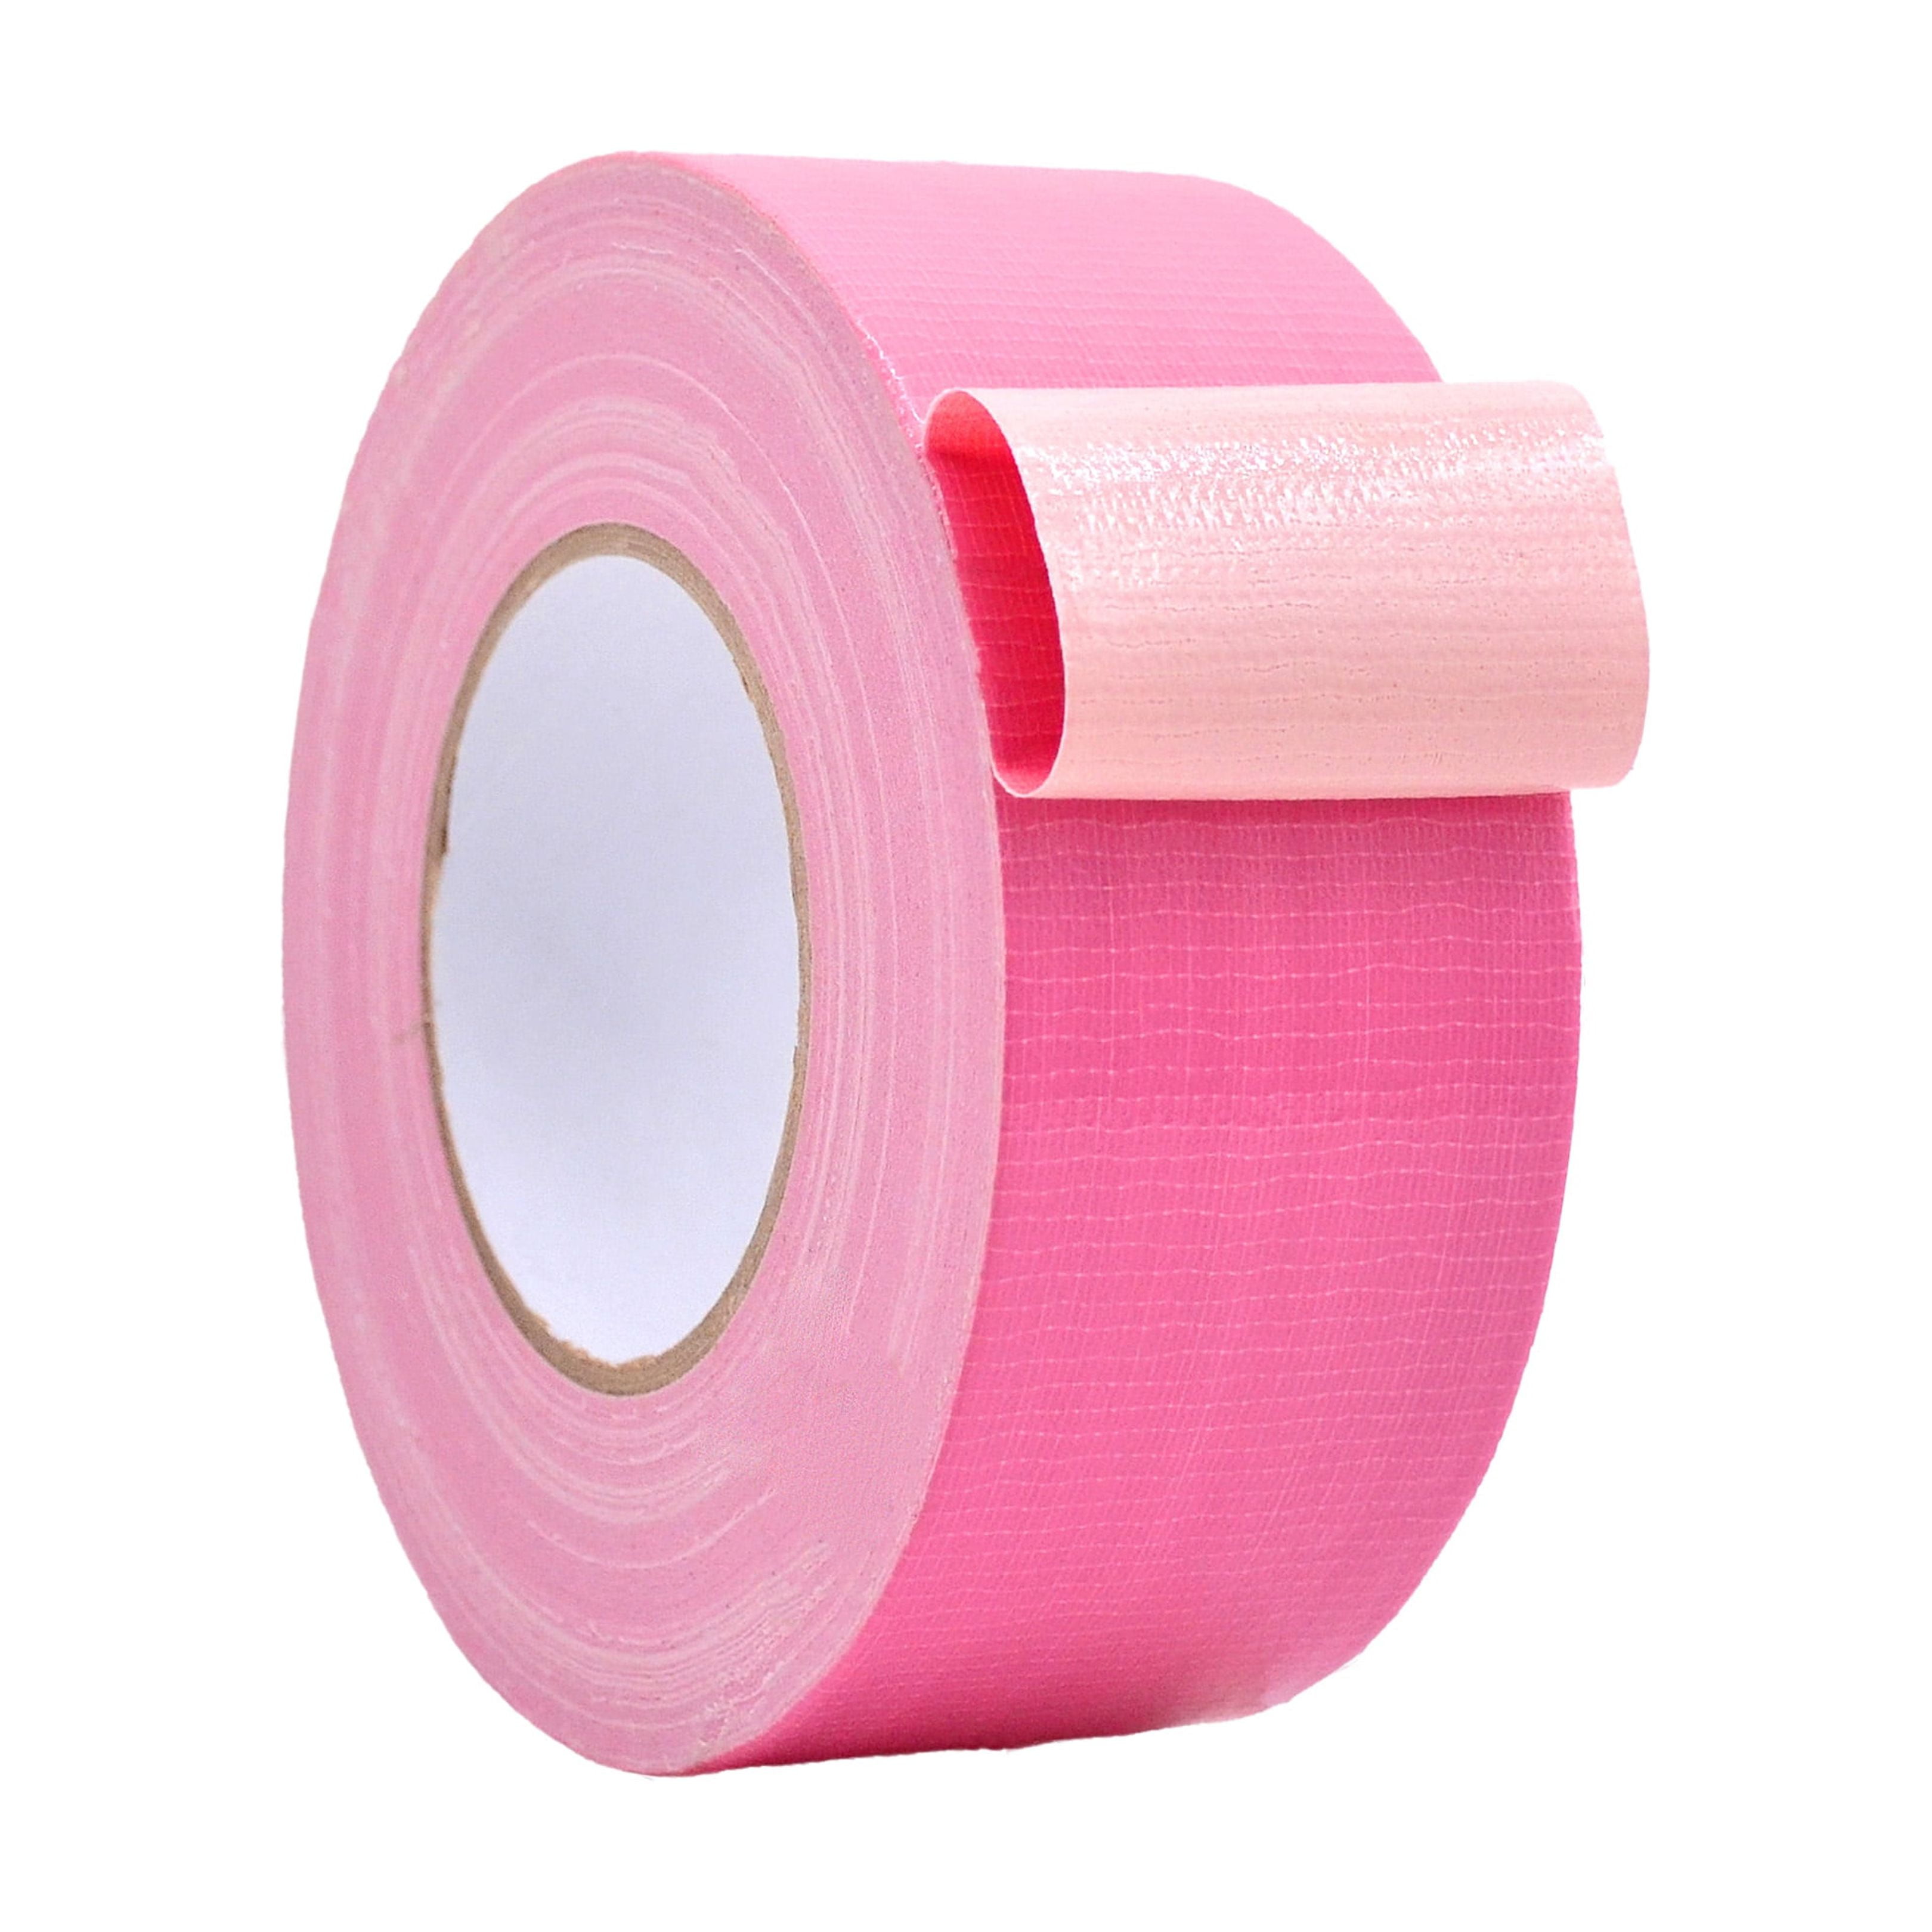 Wod Tape White Duct Tape - 6 in x 60 yds - Strong Waterproof Dtc10